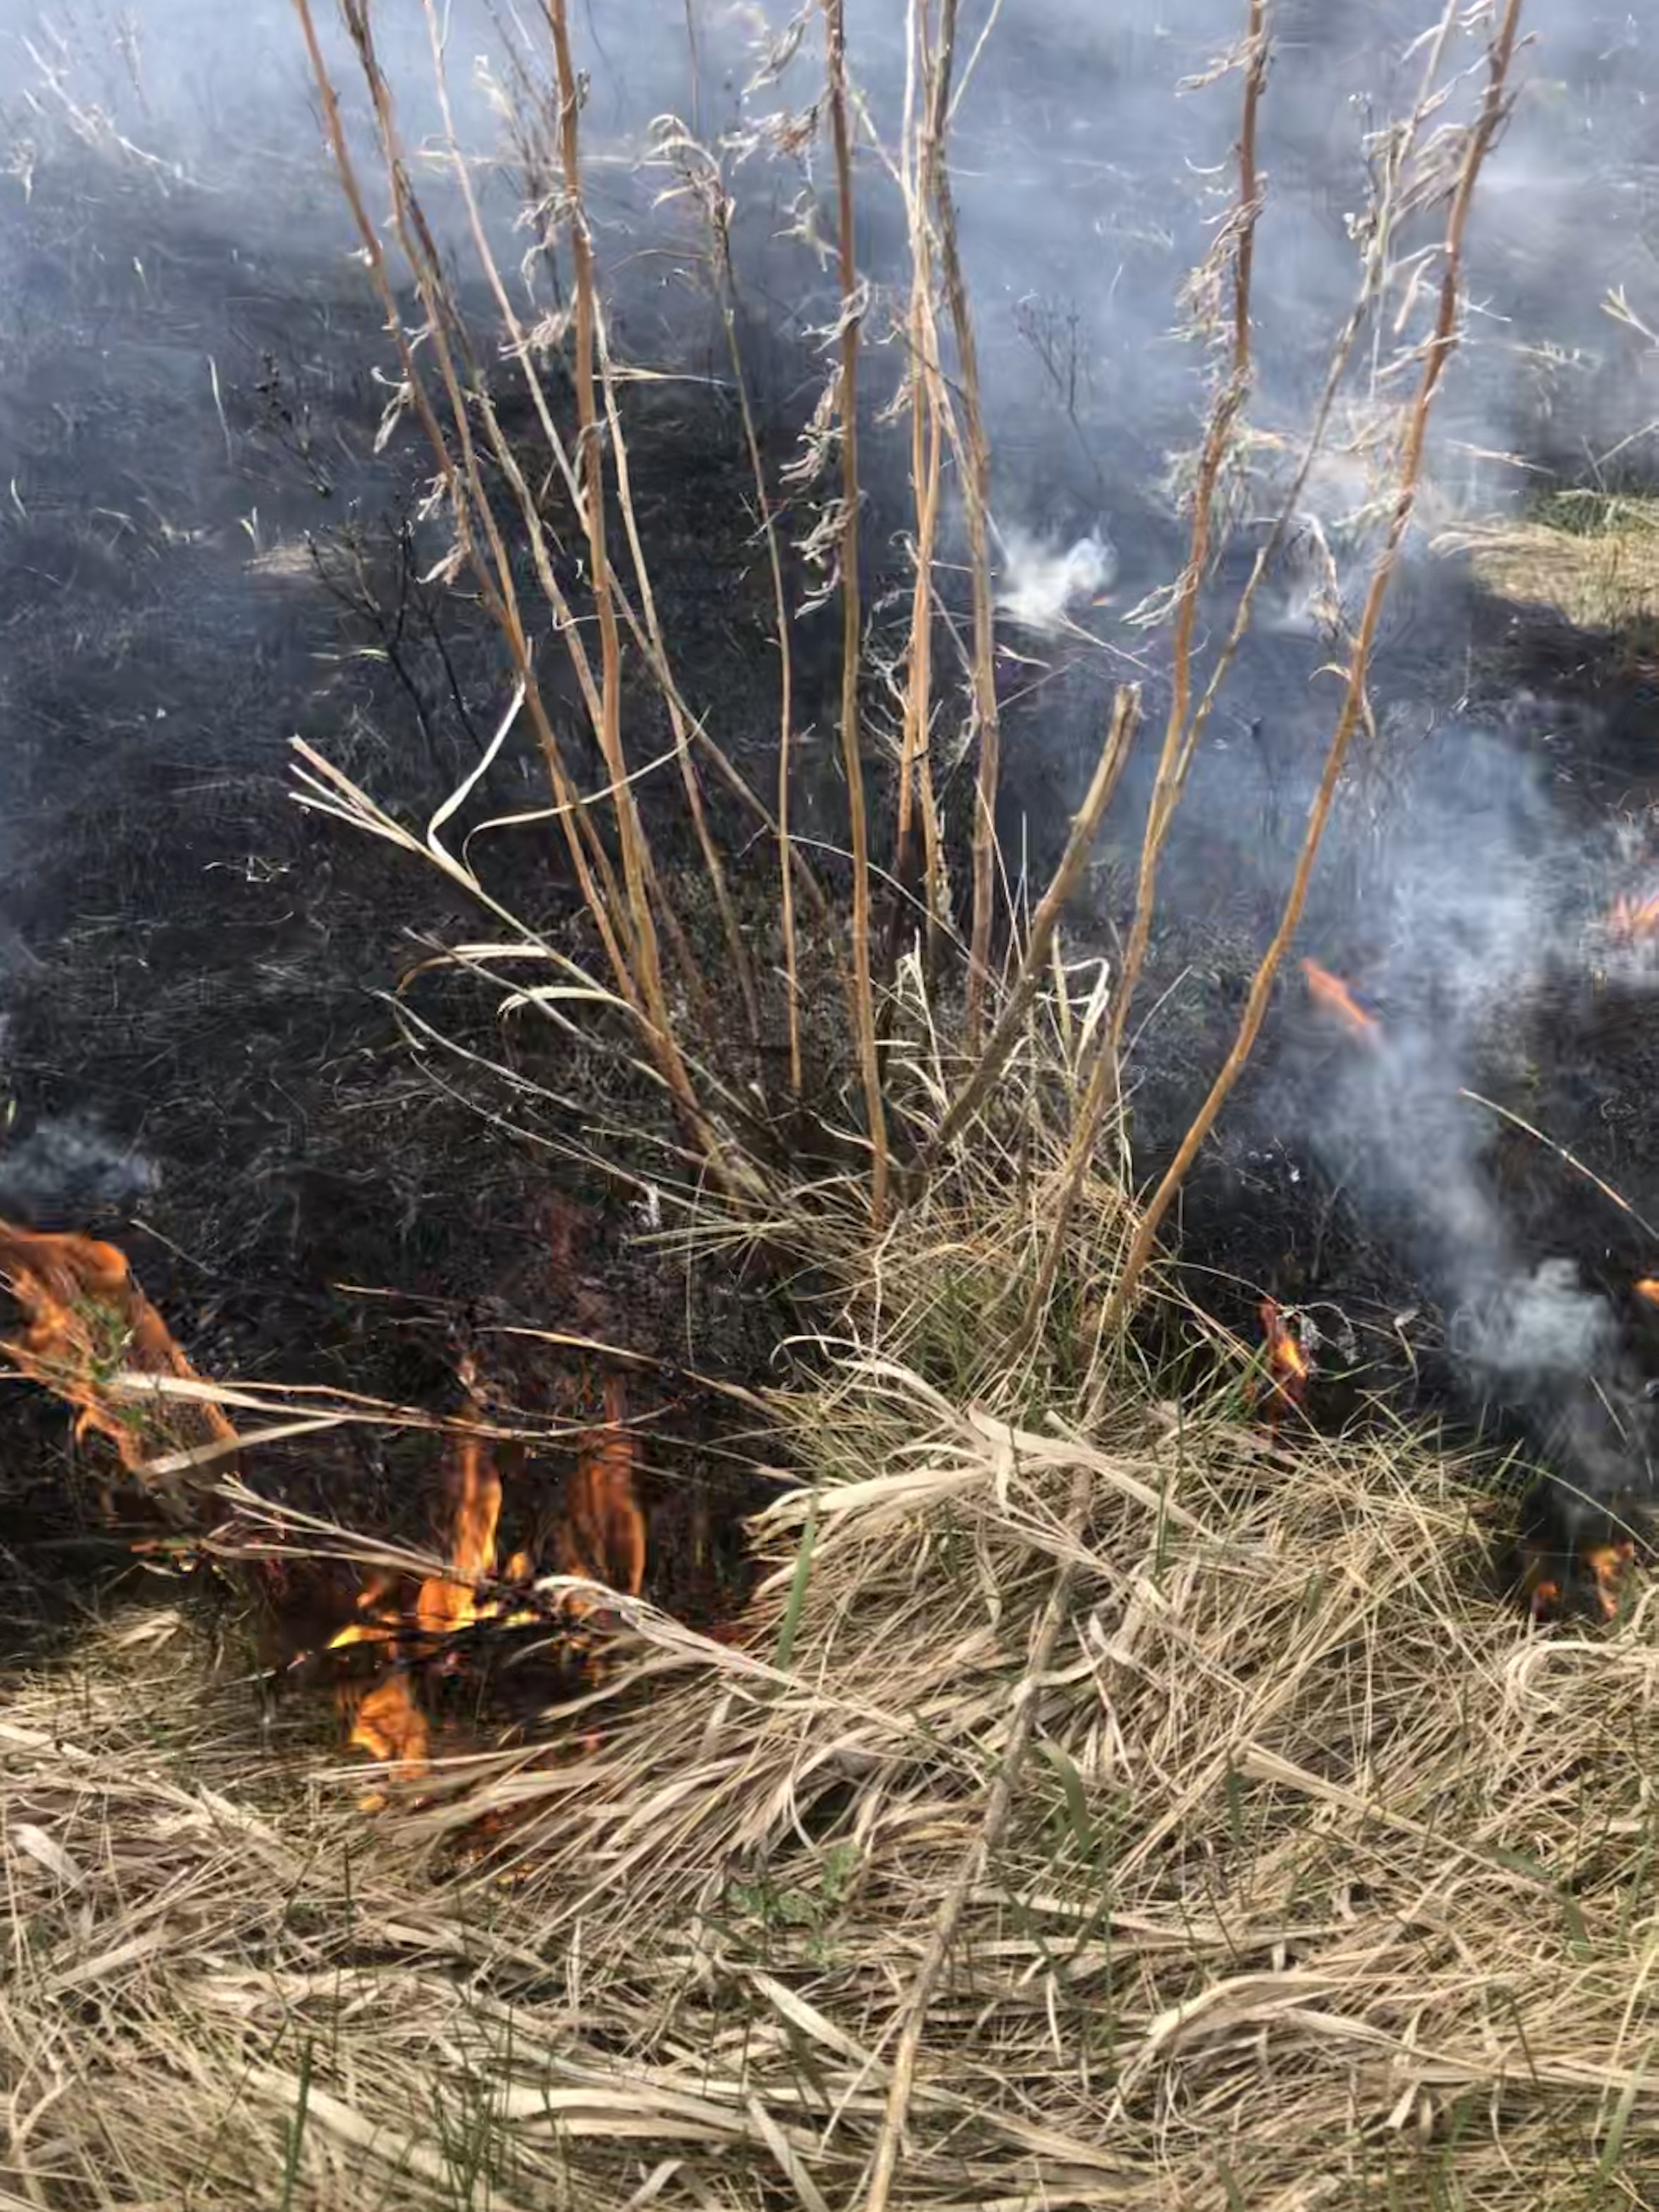 The scientists will assess how a common management practice compares with treatments that use fire and/or grazing to promote more variable habitats. (NDSU photo)